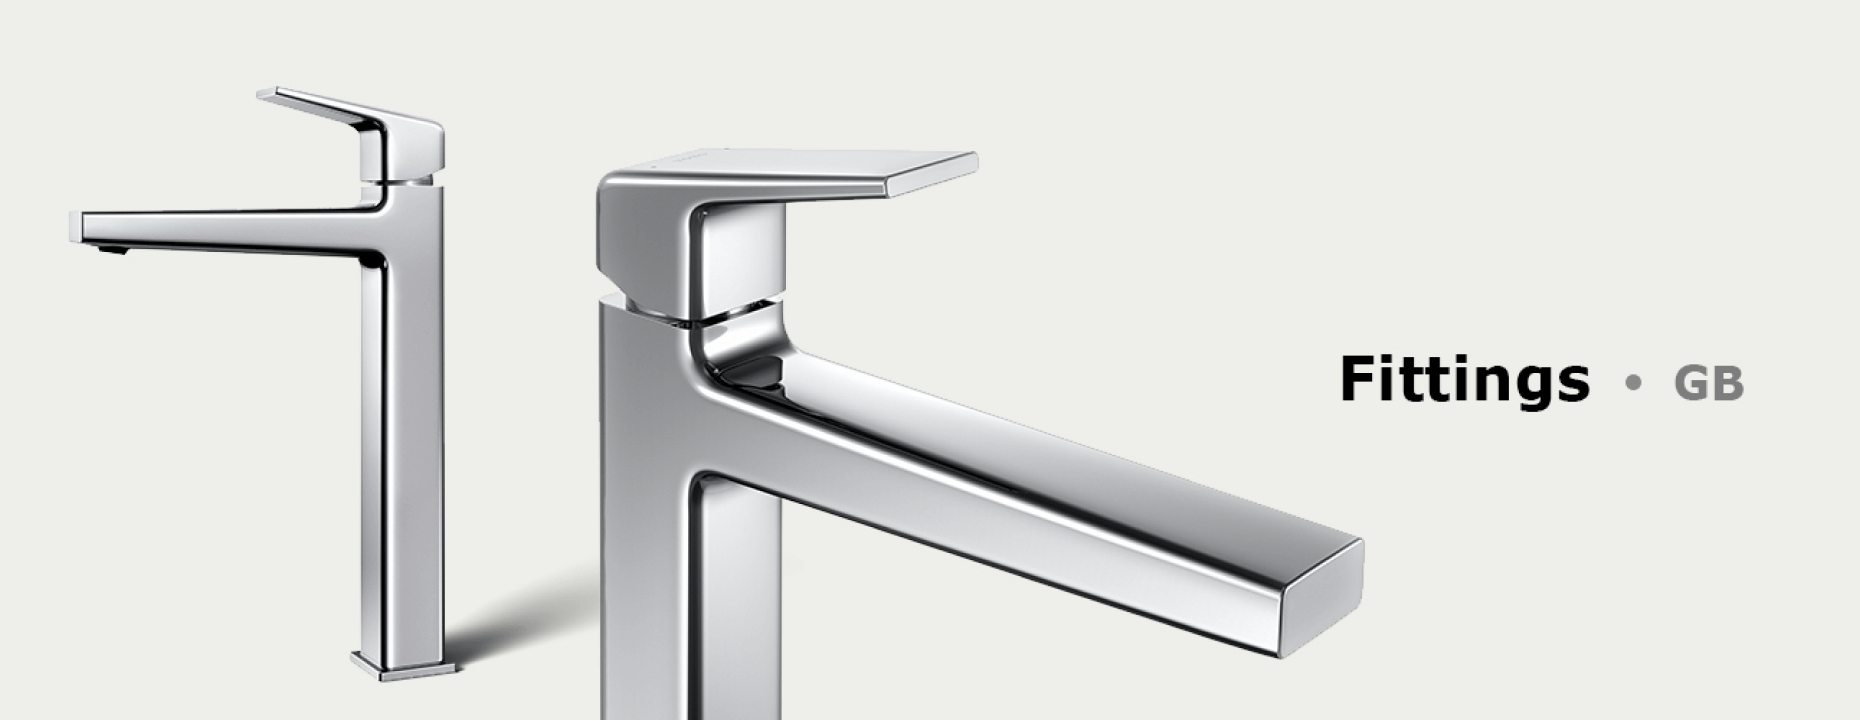 Single Lever Washbasin Faucet w/Pop-up Waste